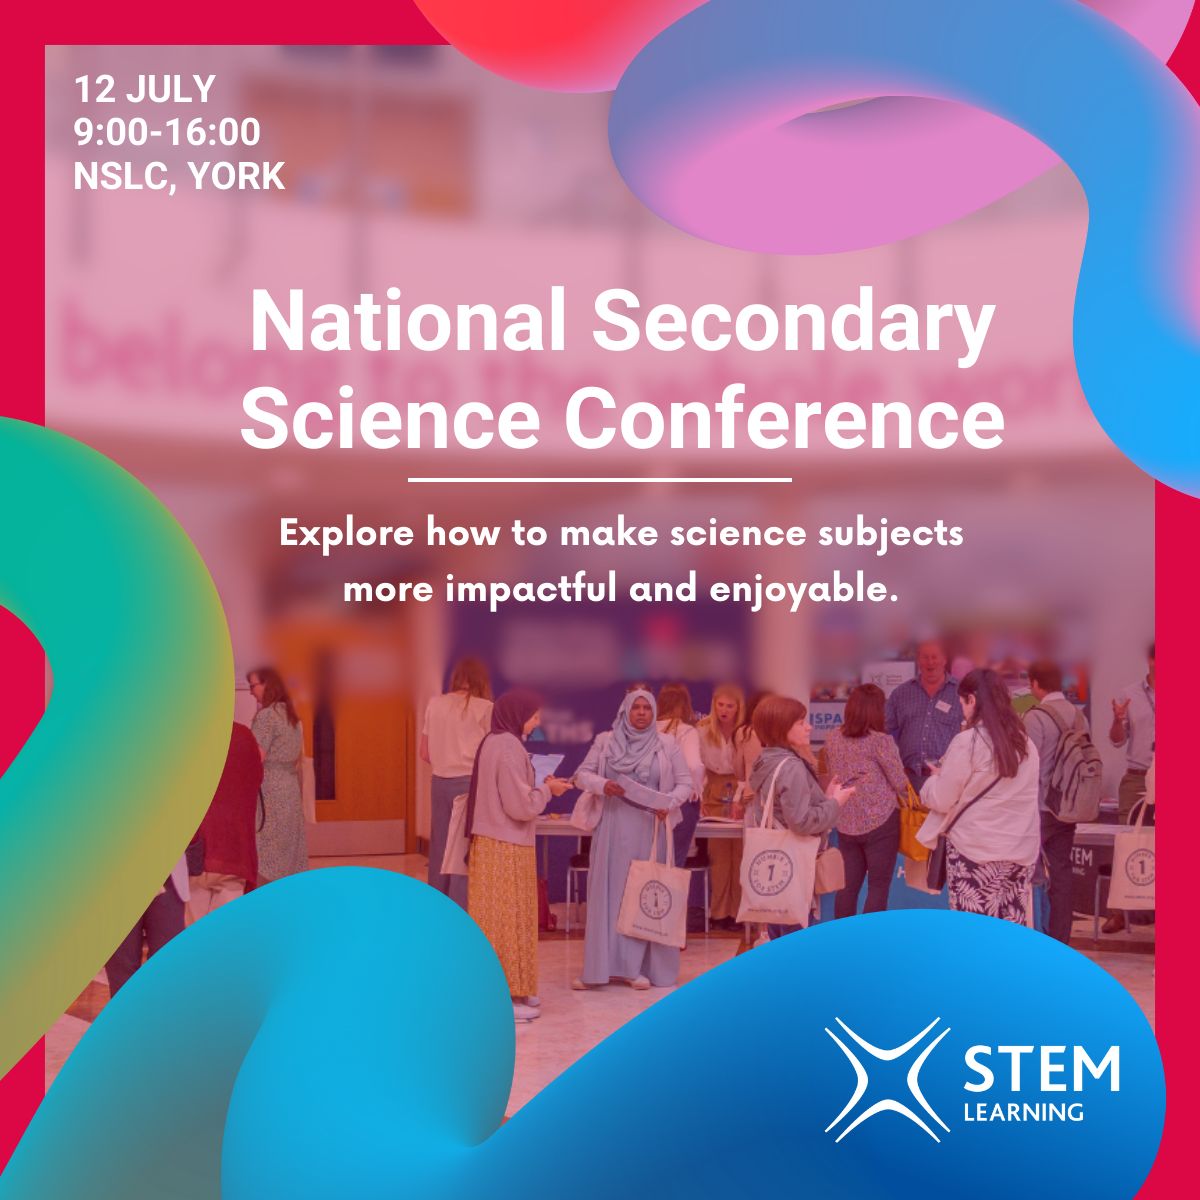 Elevate your secondary science curriculum at the National Secondary Science Conference! - Join us on 12 July packed with inspiring conversations, effective resources and hands-on workshops. Book your spot now > bit.ly/44uu8to #STEM #ScienceConference